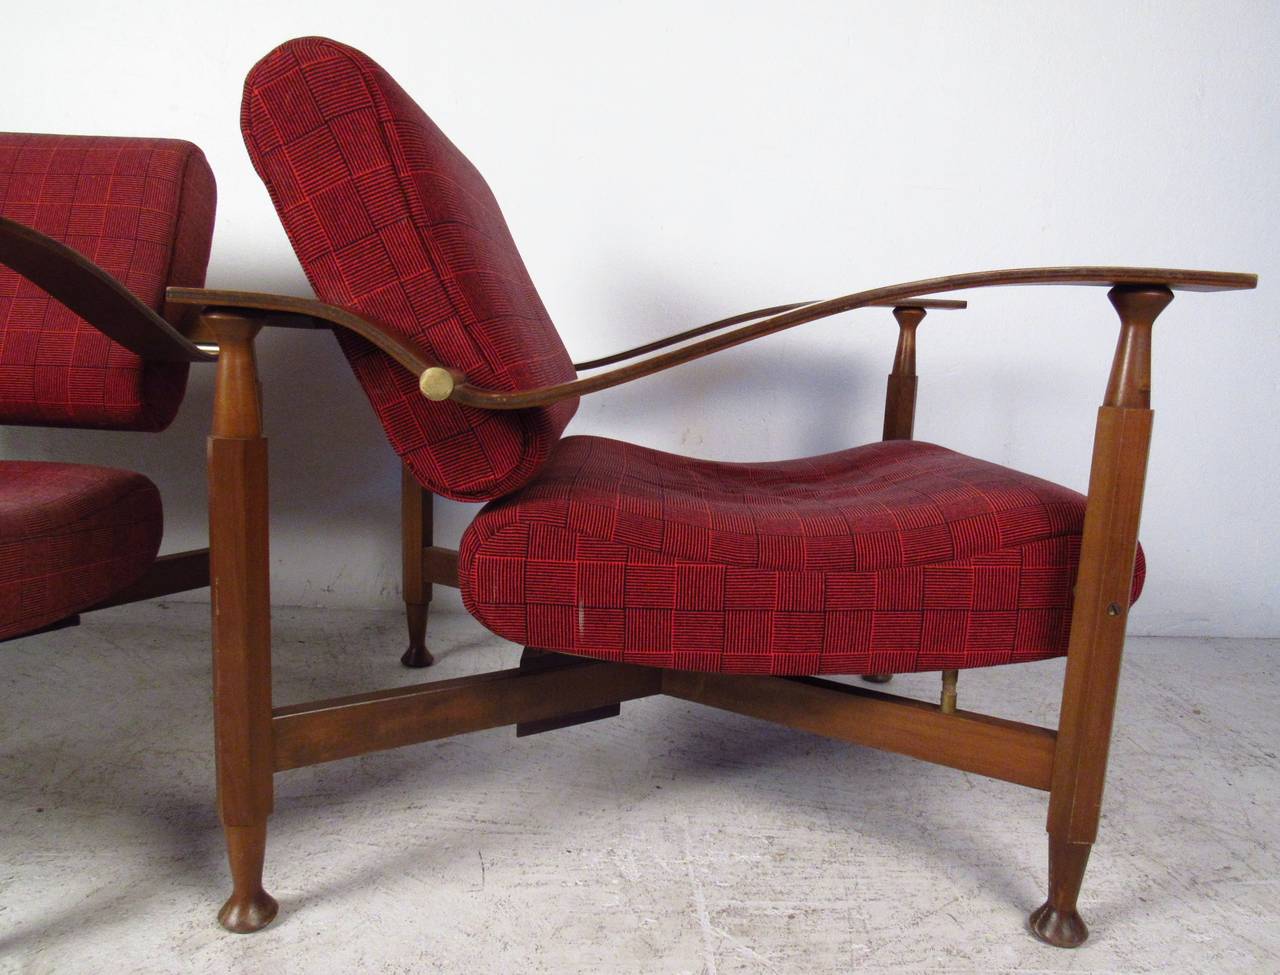 Pair of Sculpted Teak Midcentury Upholstered Lounge Chairs 1